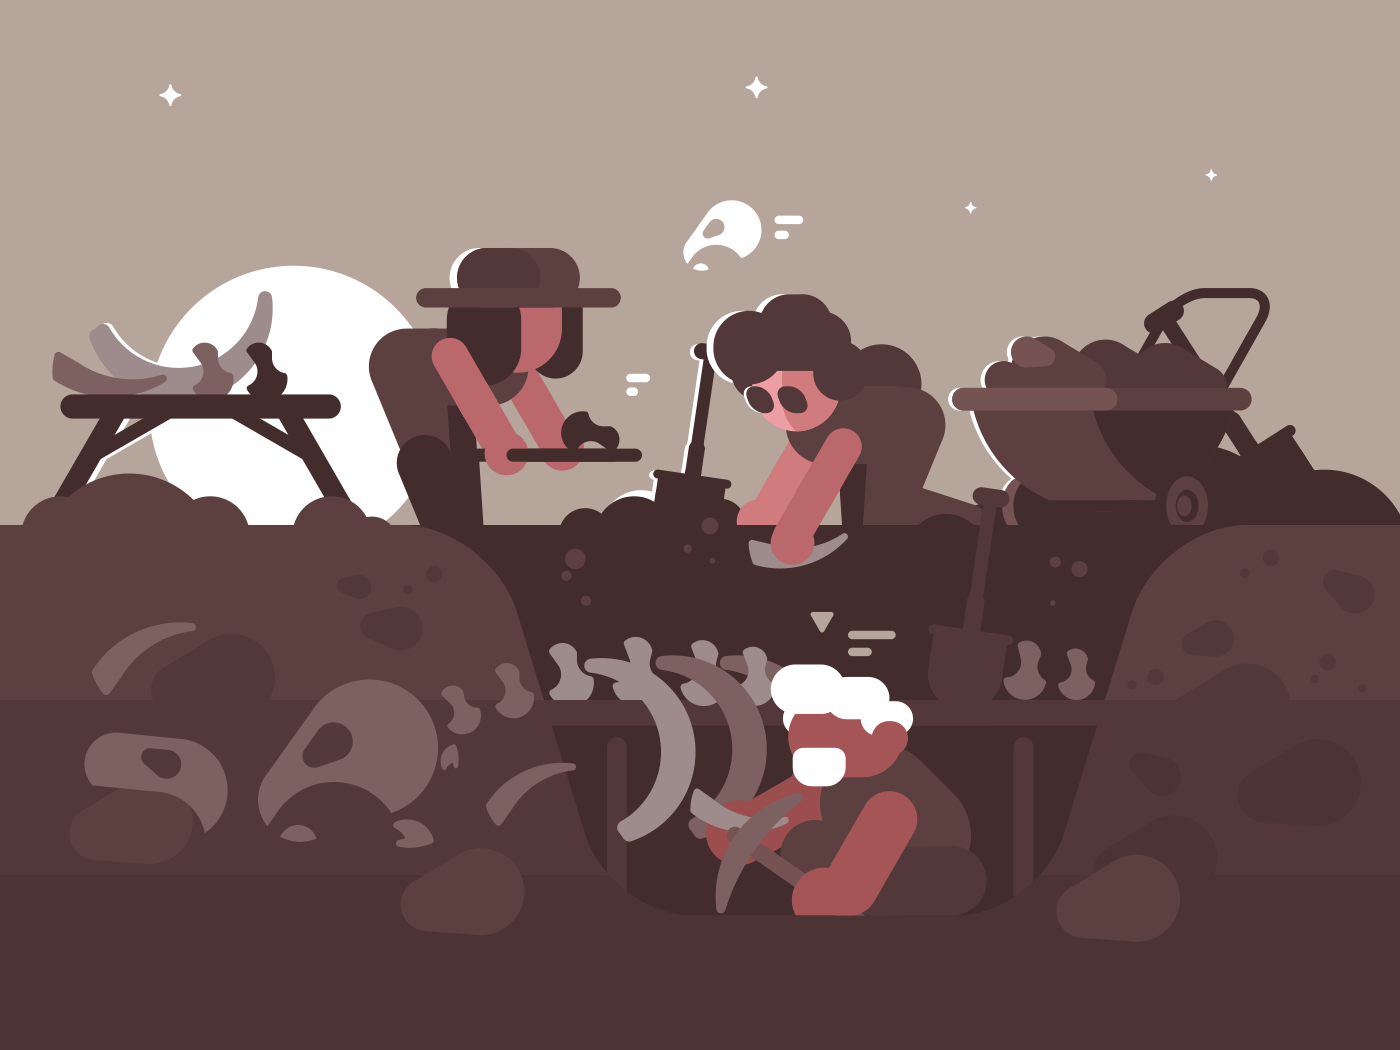 Group of archaeologists on excavations. Men dig out dinosaur bones at night. Vector illustration